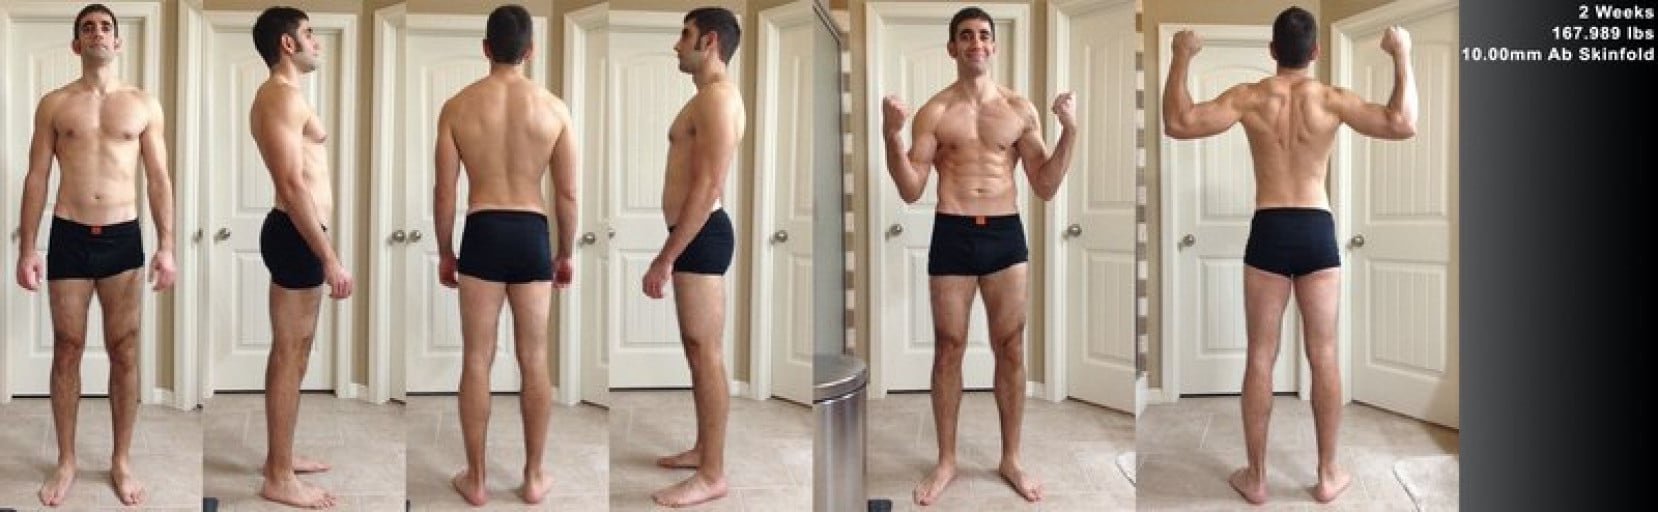 A before and after photo of a 5'11" male showing a snapshot of 164 pounds at a height of 5'11